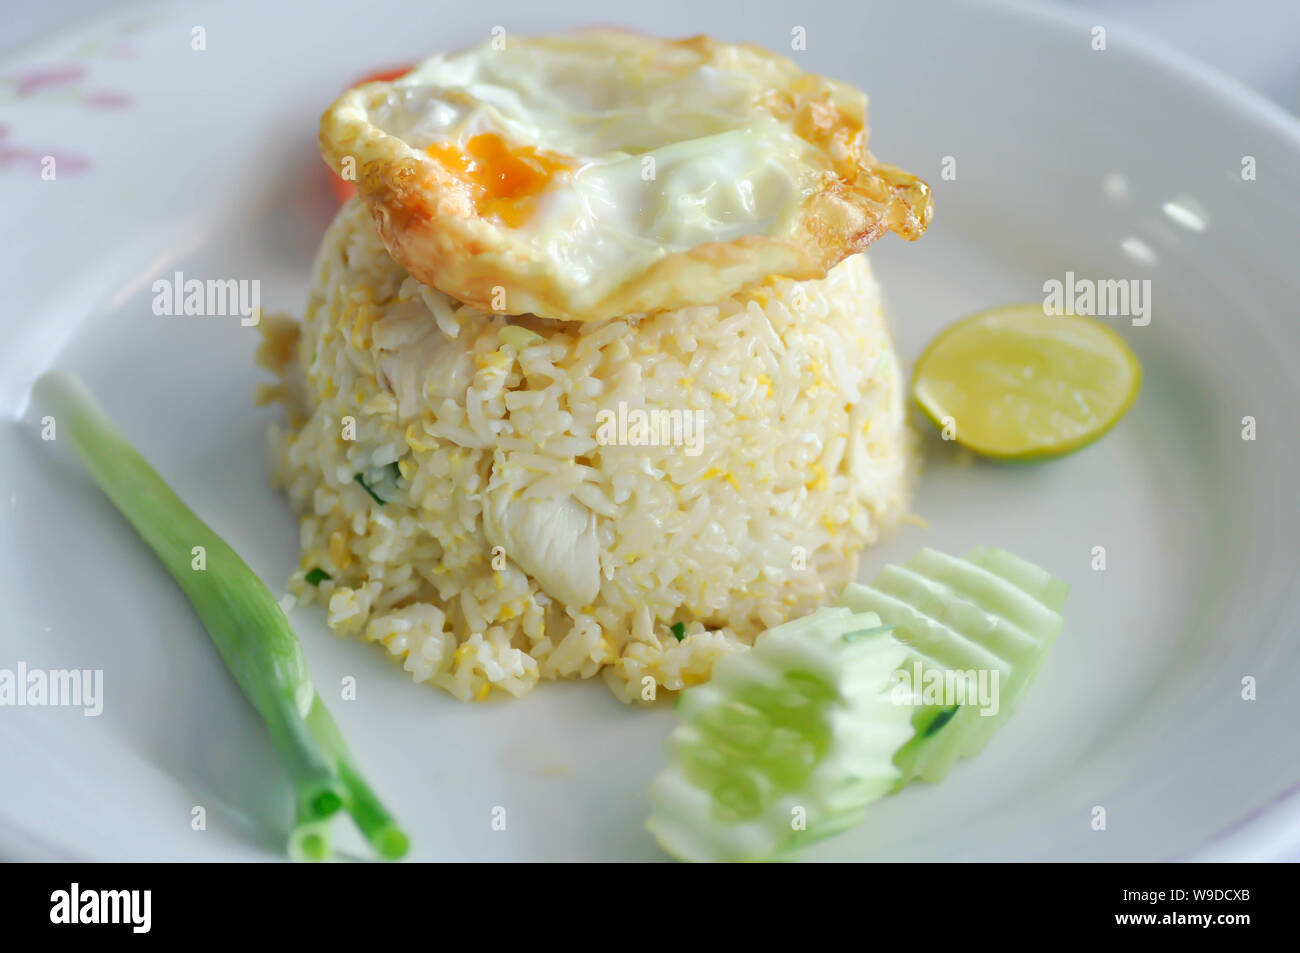 fried rice or stir-fried rice with fried egg and cucumber Stock Photo